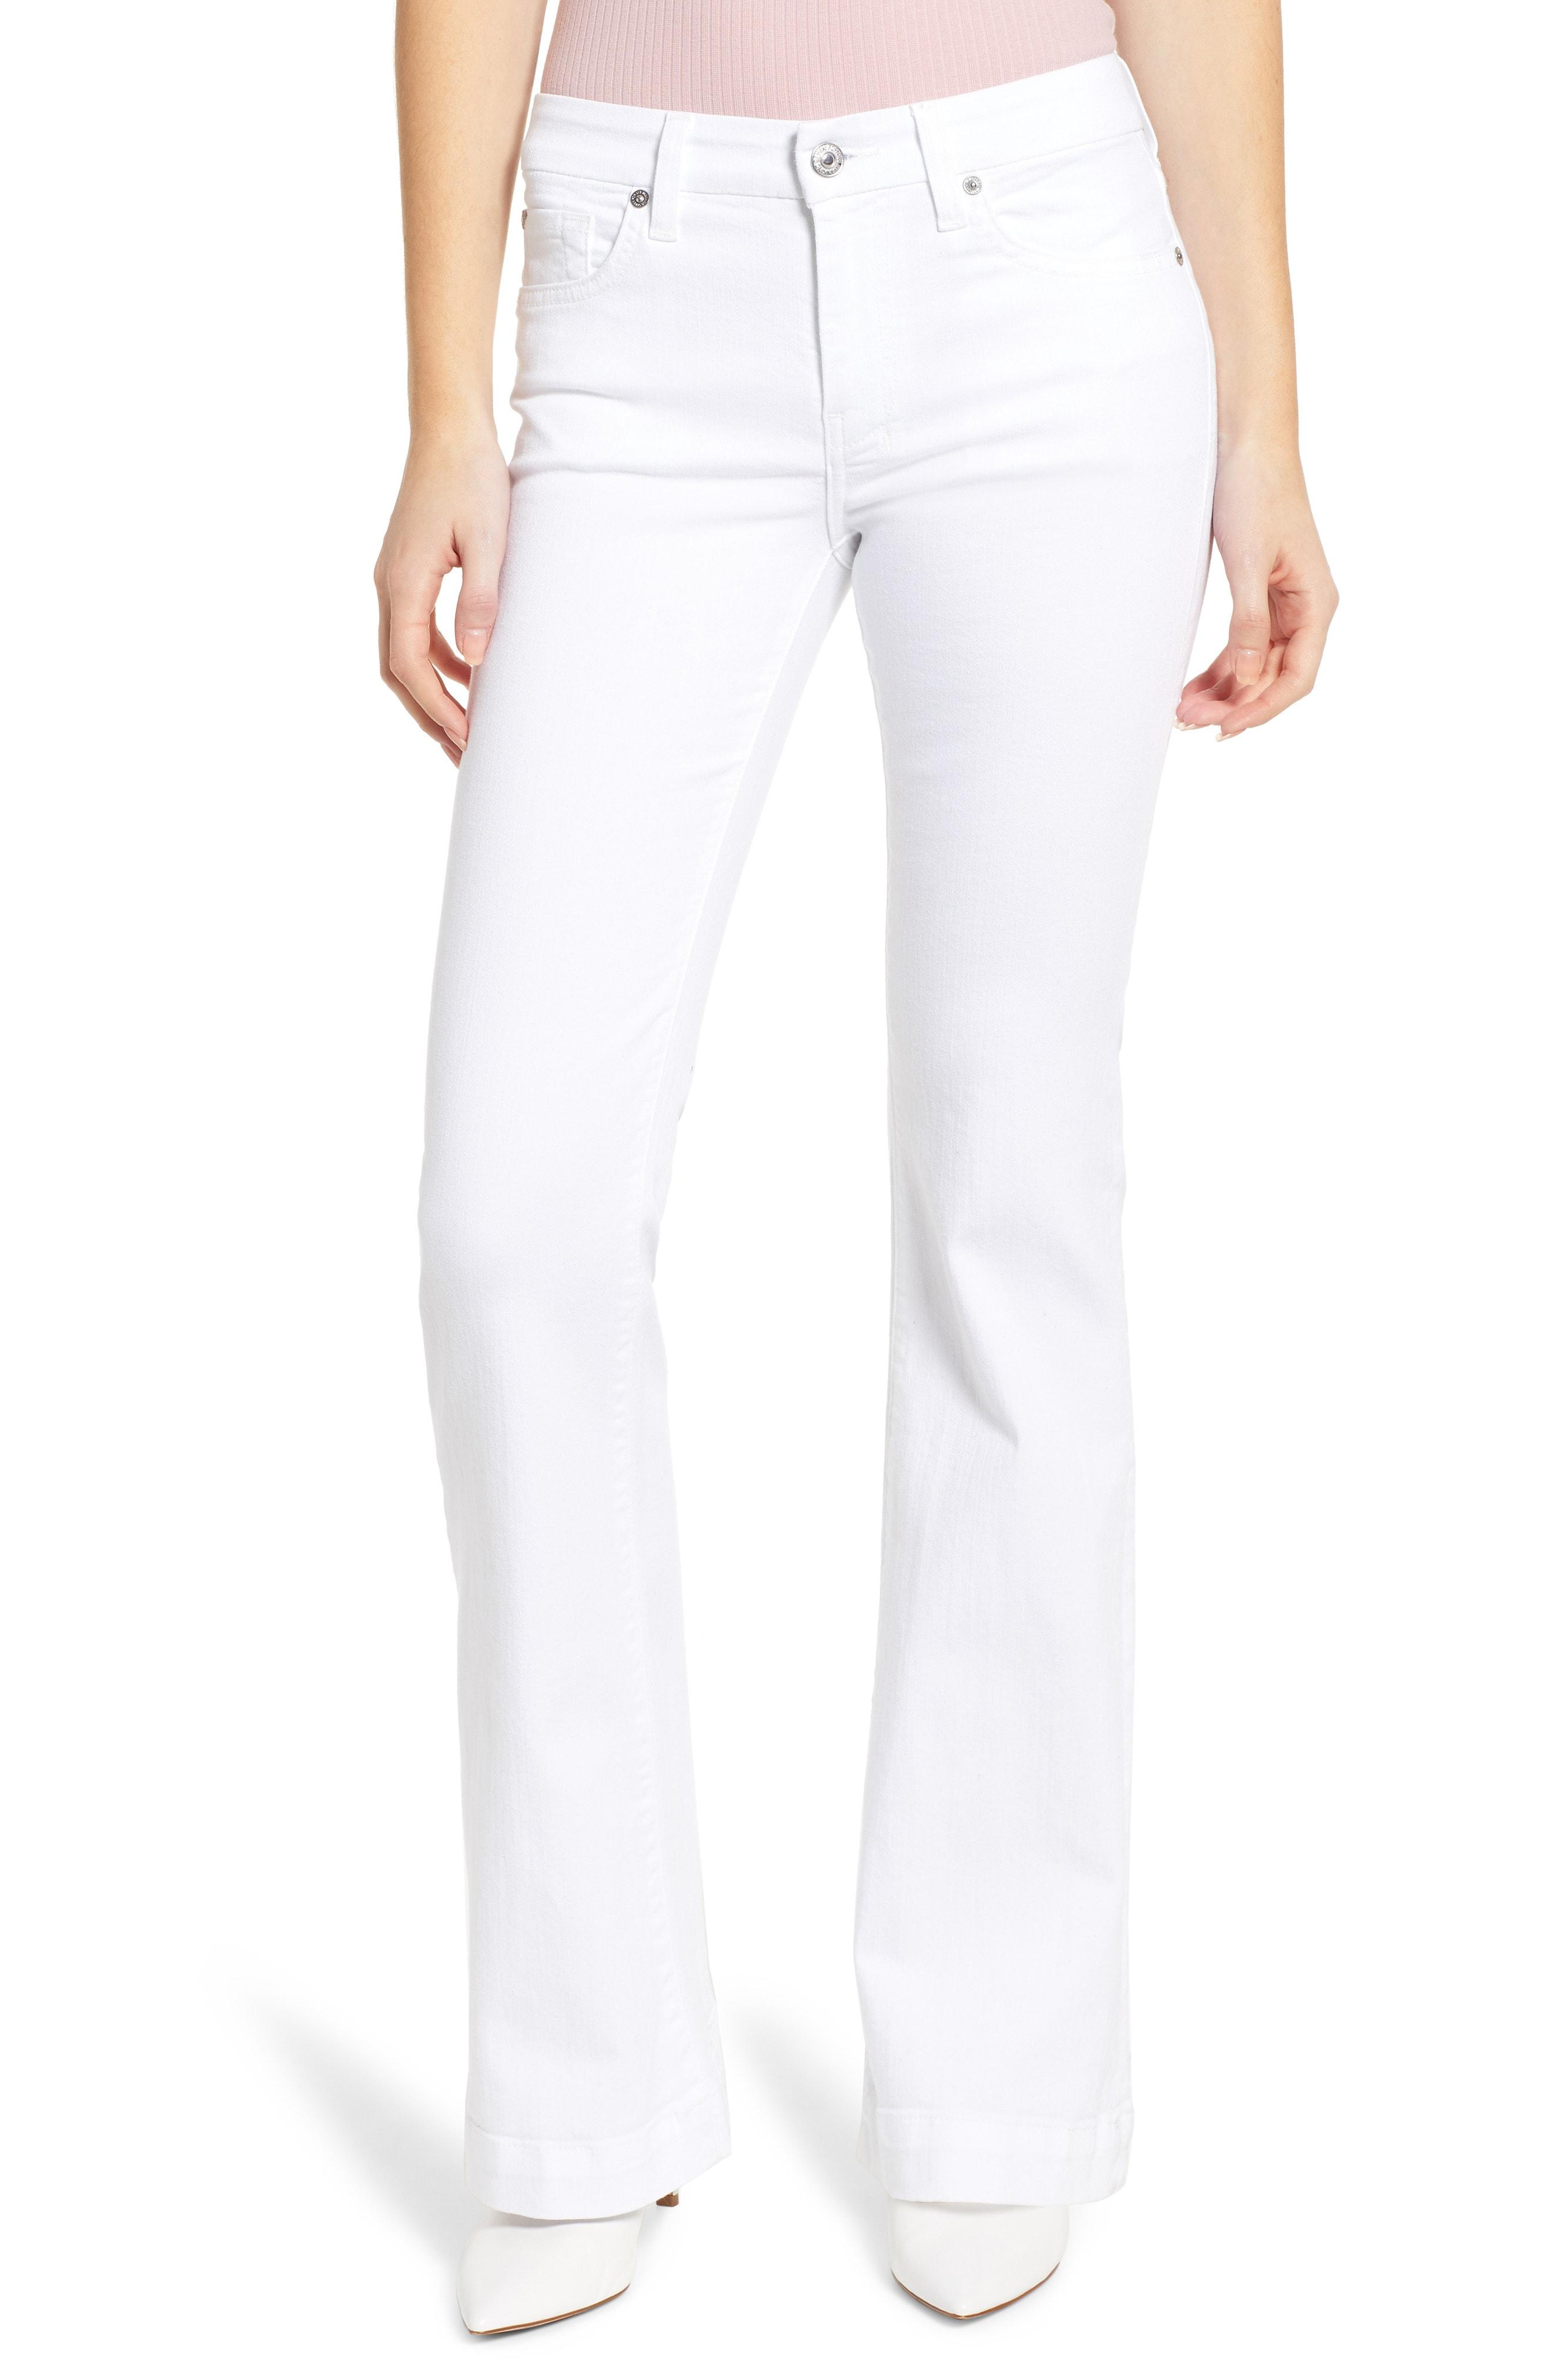 Lyst - 7 For All Mankind 7 For All Mankind Dojo Flare Jeans in White